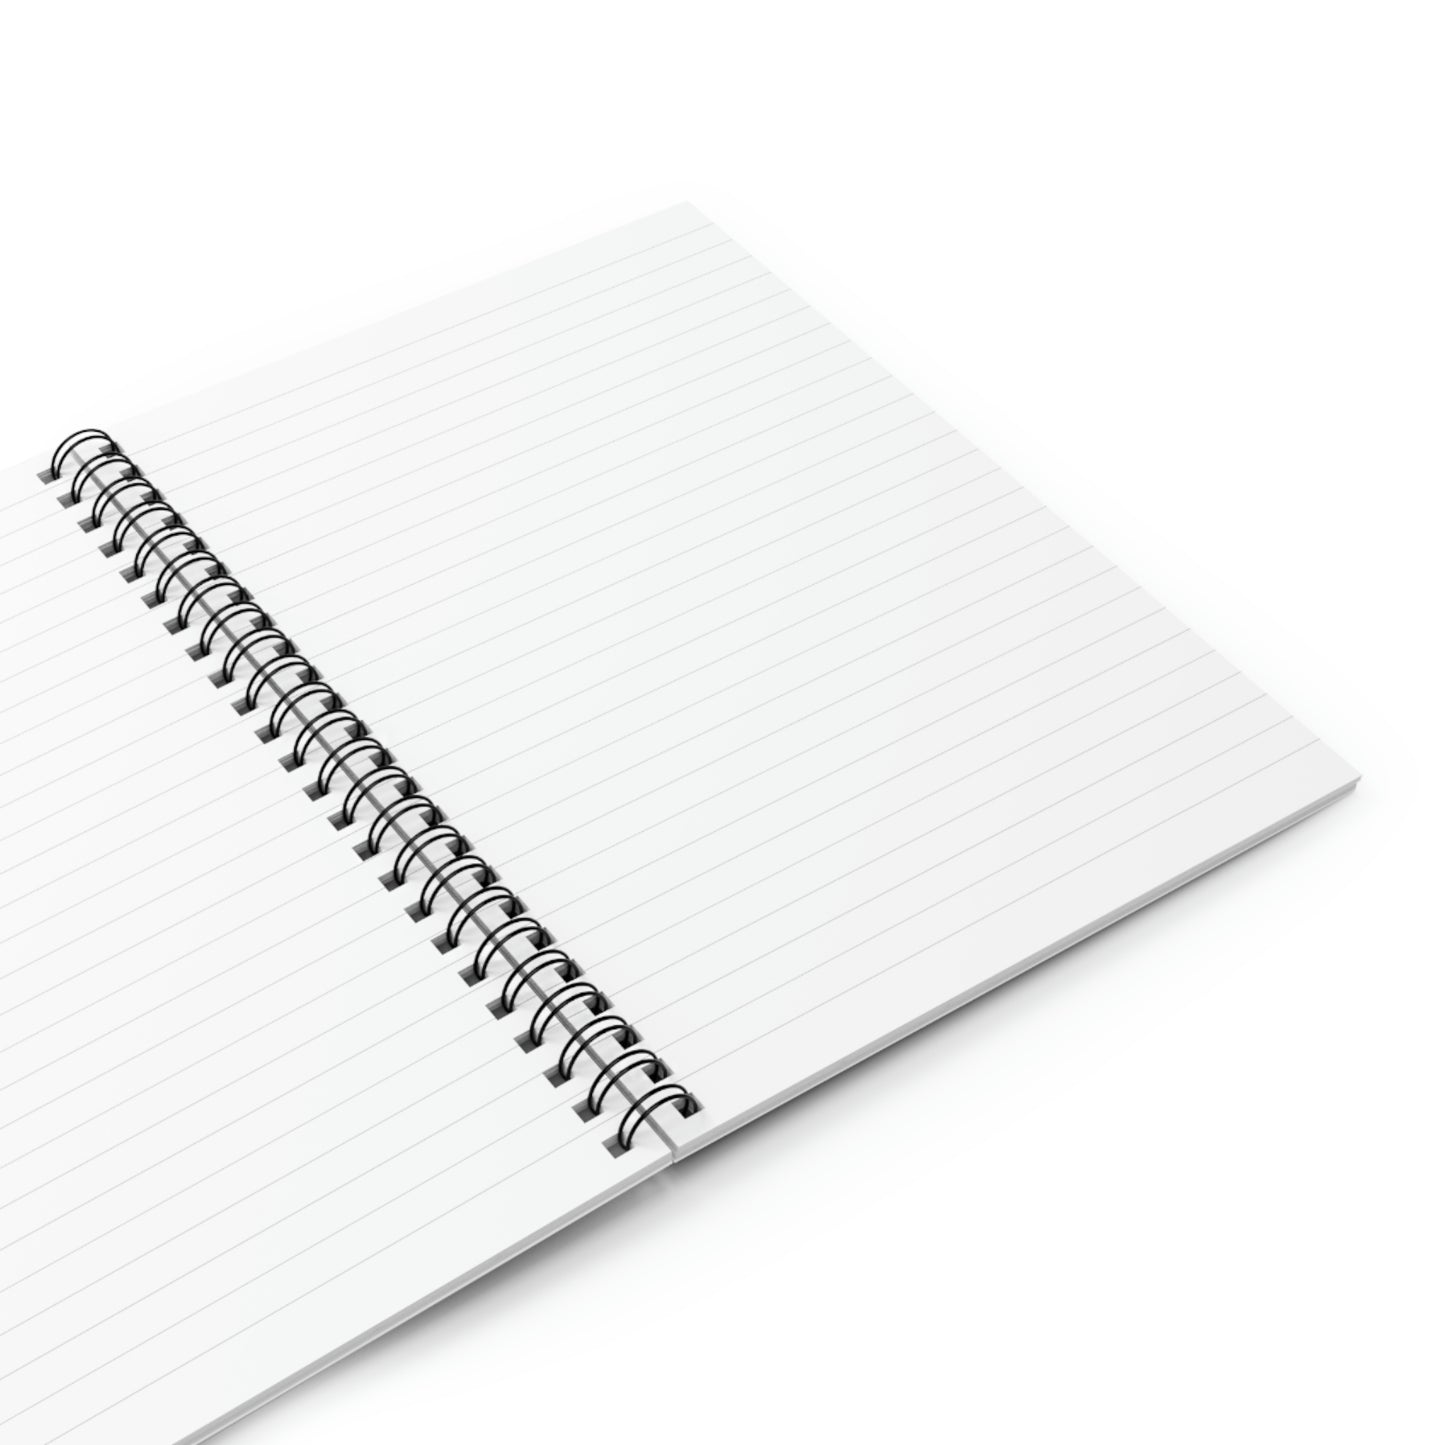 Trapper's Delight Spiral Notebook